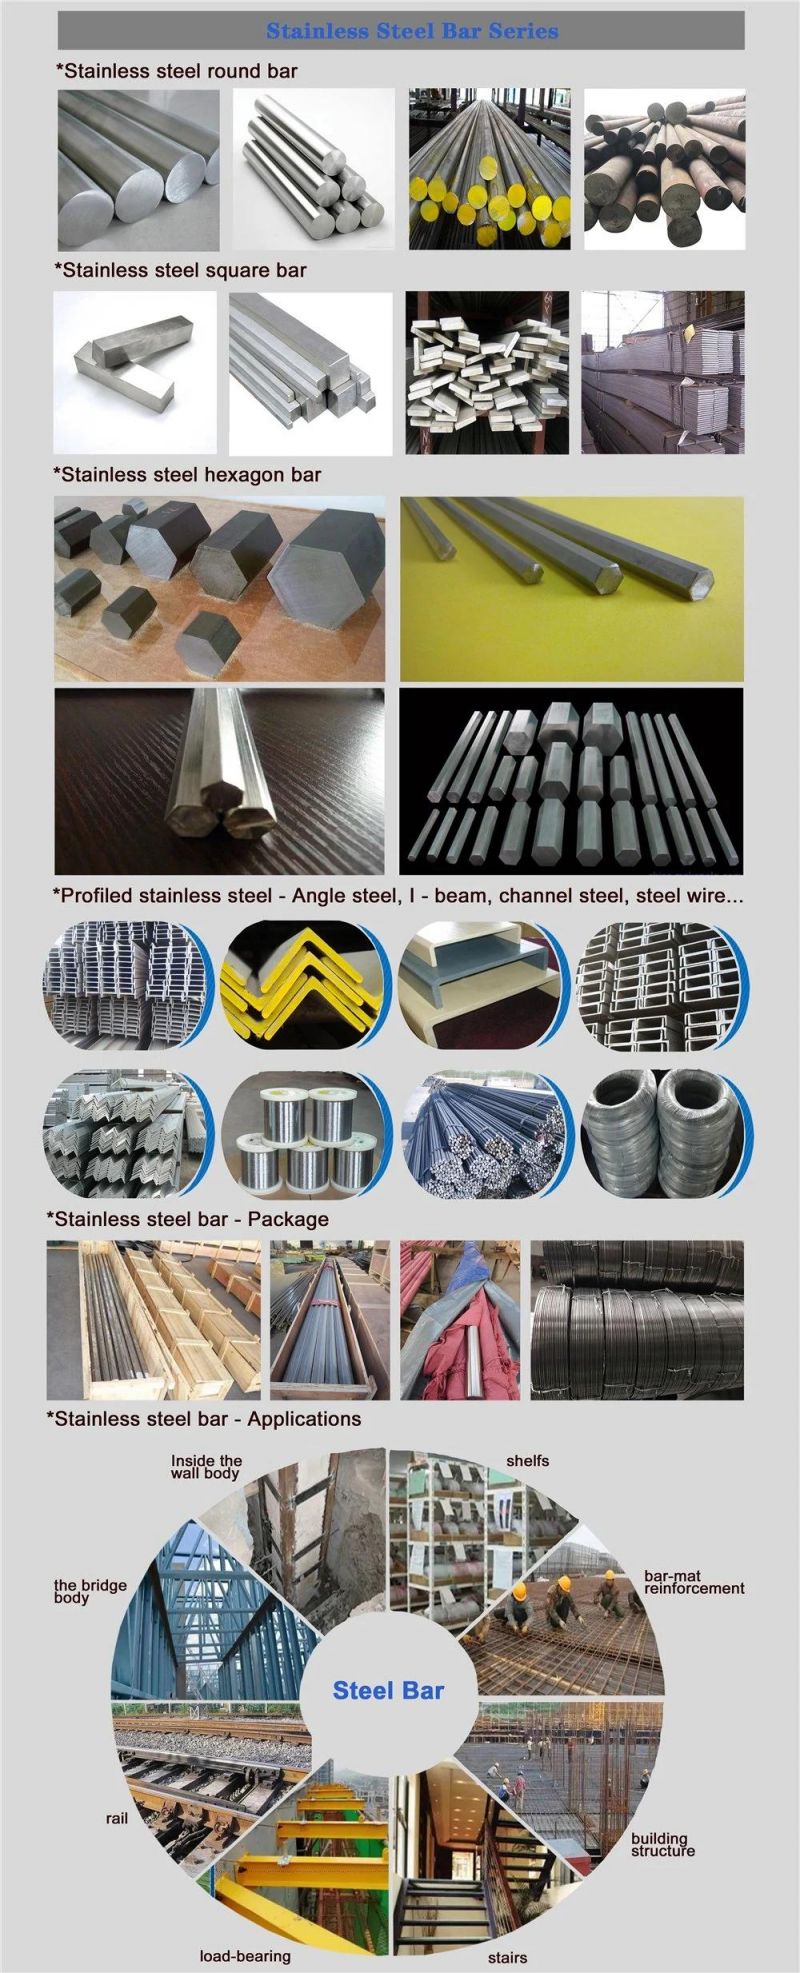 Hot Sale Factory Direct Stainless Steel Rebar Carbon Steel Deformed Steel Bar Iron Rods for Construction